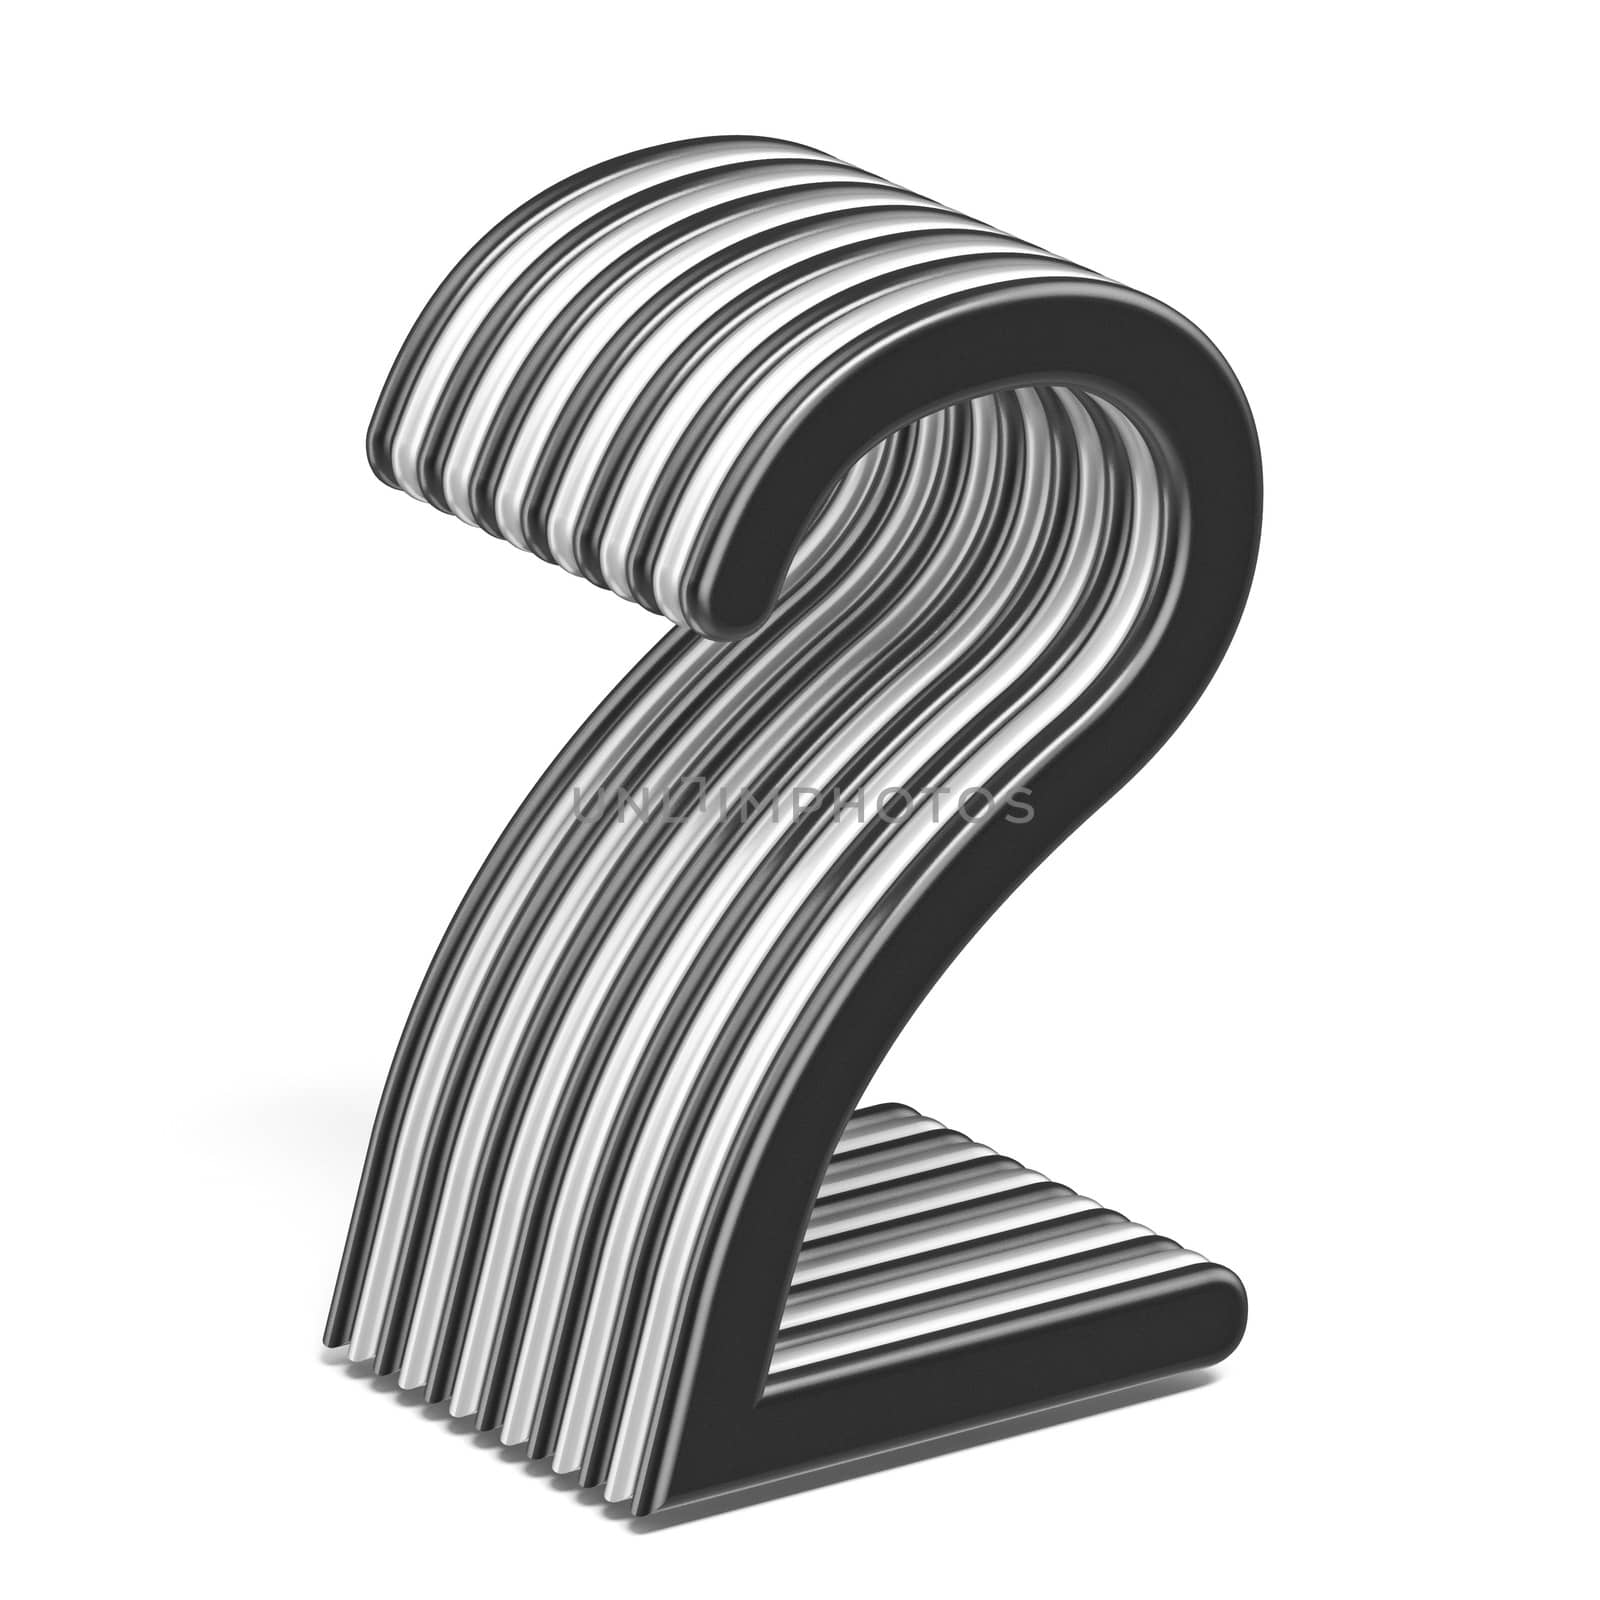 Black and white layered Number 2 TWO 3D render illustration isolated on white background